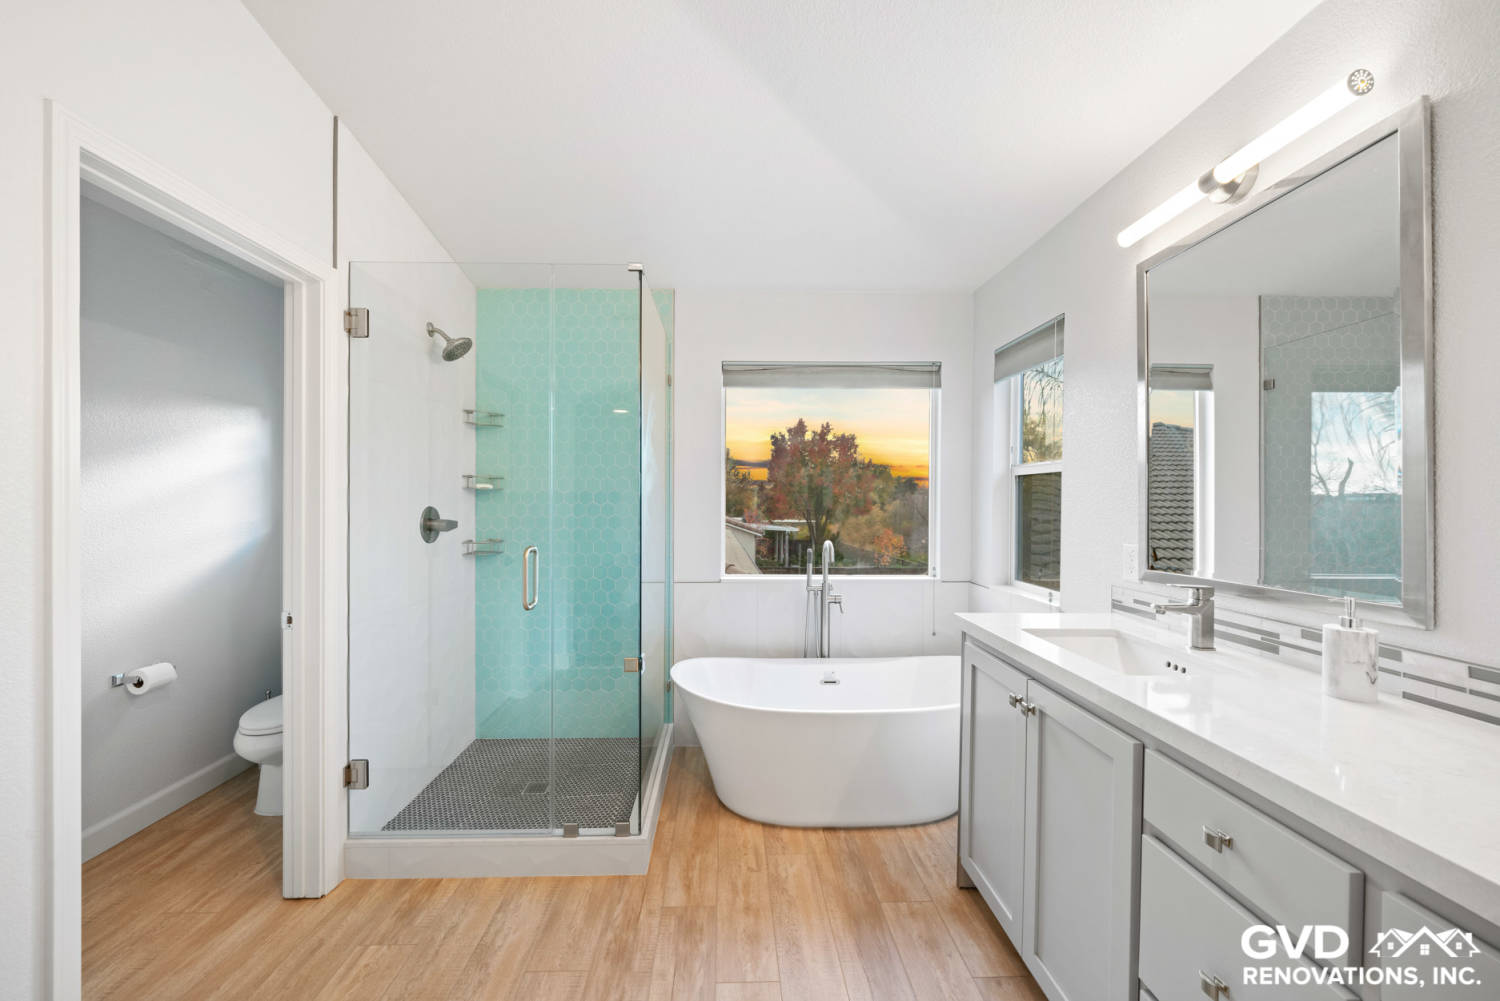 How Much Is The Average Cost Of A Bathroom Remodel